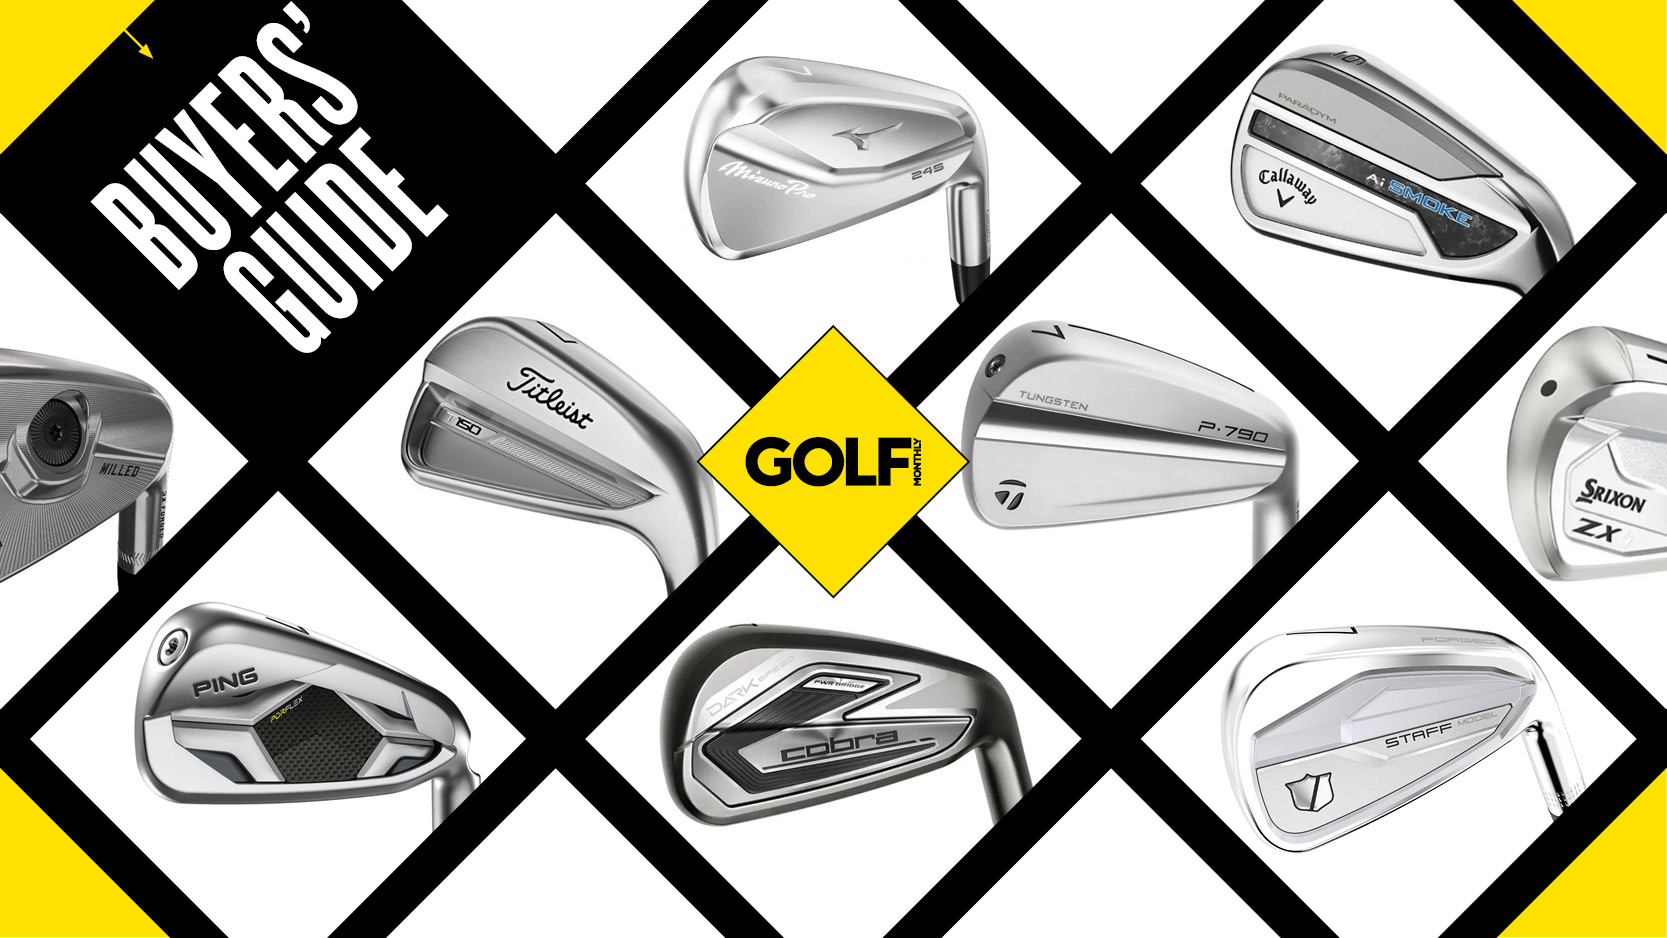 TaylorMade Qi Steel Golf Irons from american golf